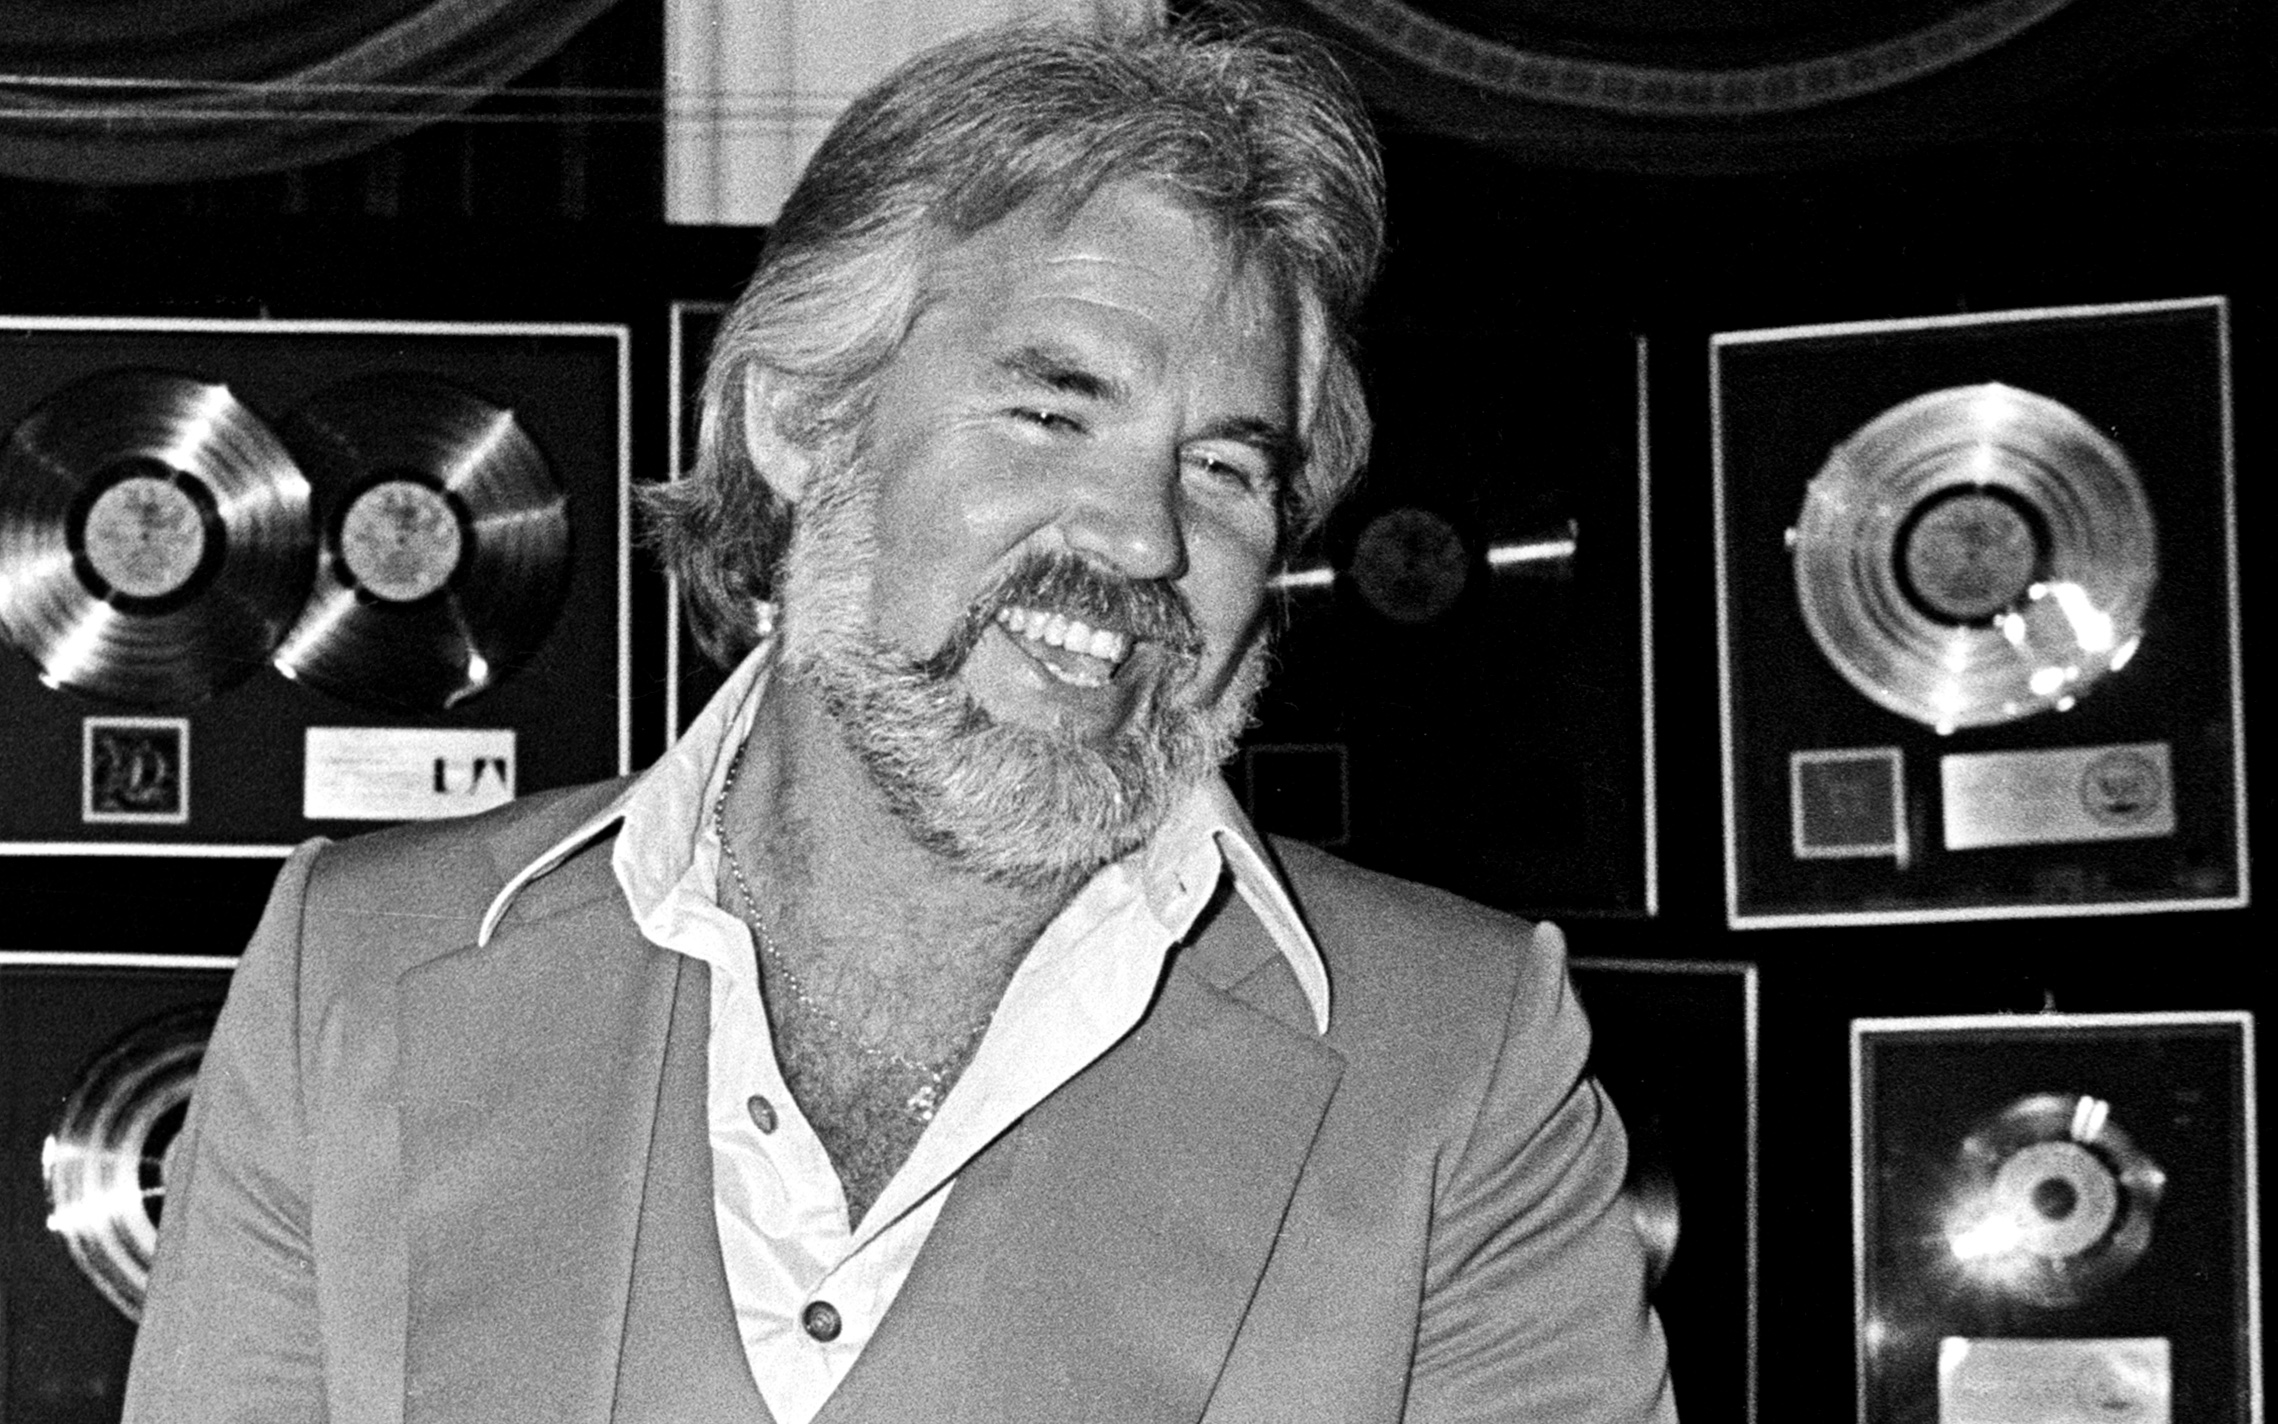 kenny rogers through the years photo